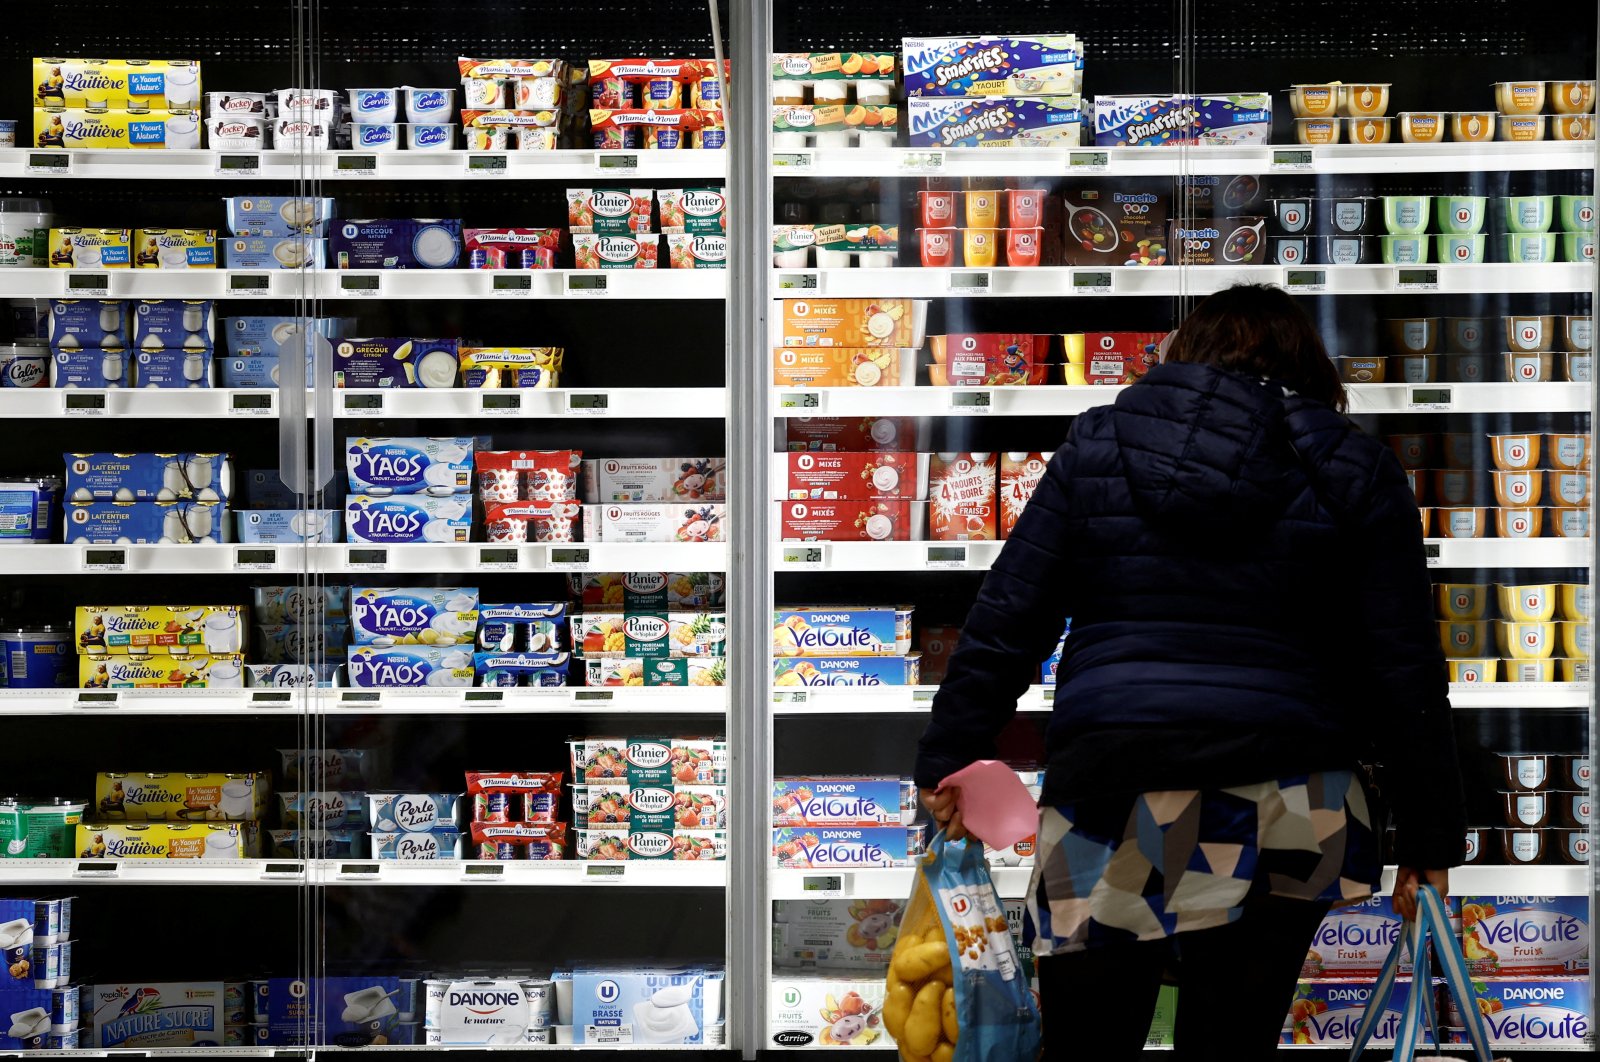 A woman looks at dairy products in a supermarket in La Verrie, France, Dec. 9, 2022. (Reuters Photo)